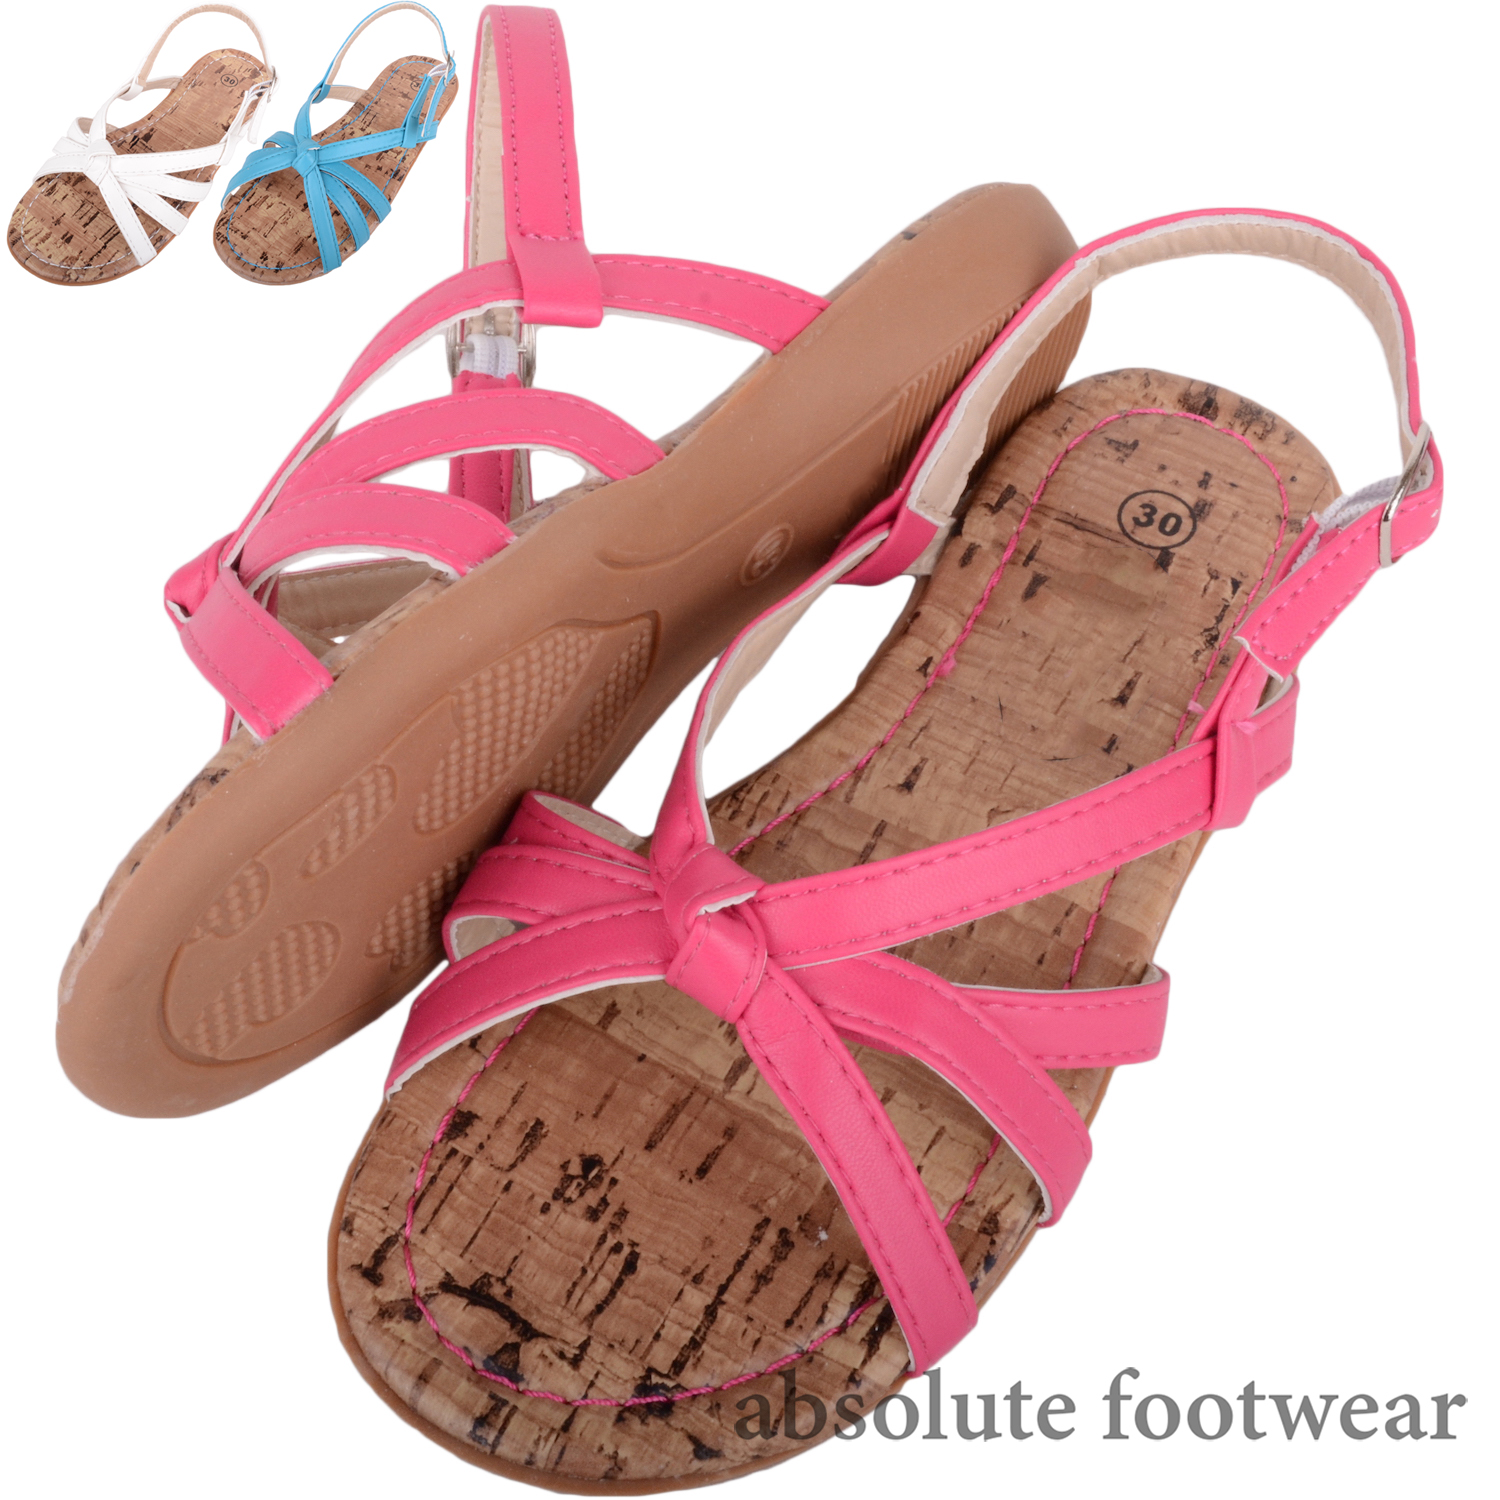 girls holiday sandals